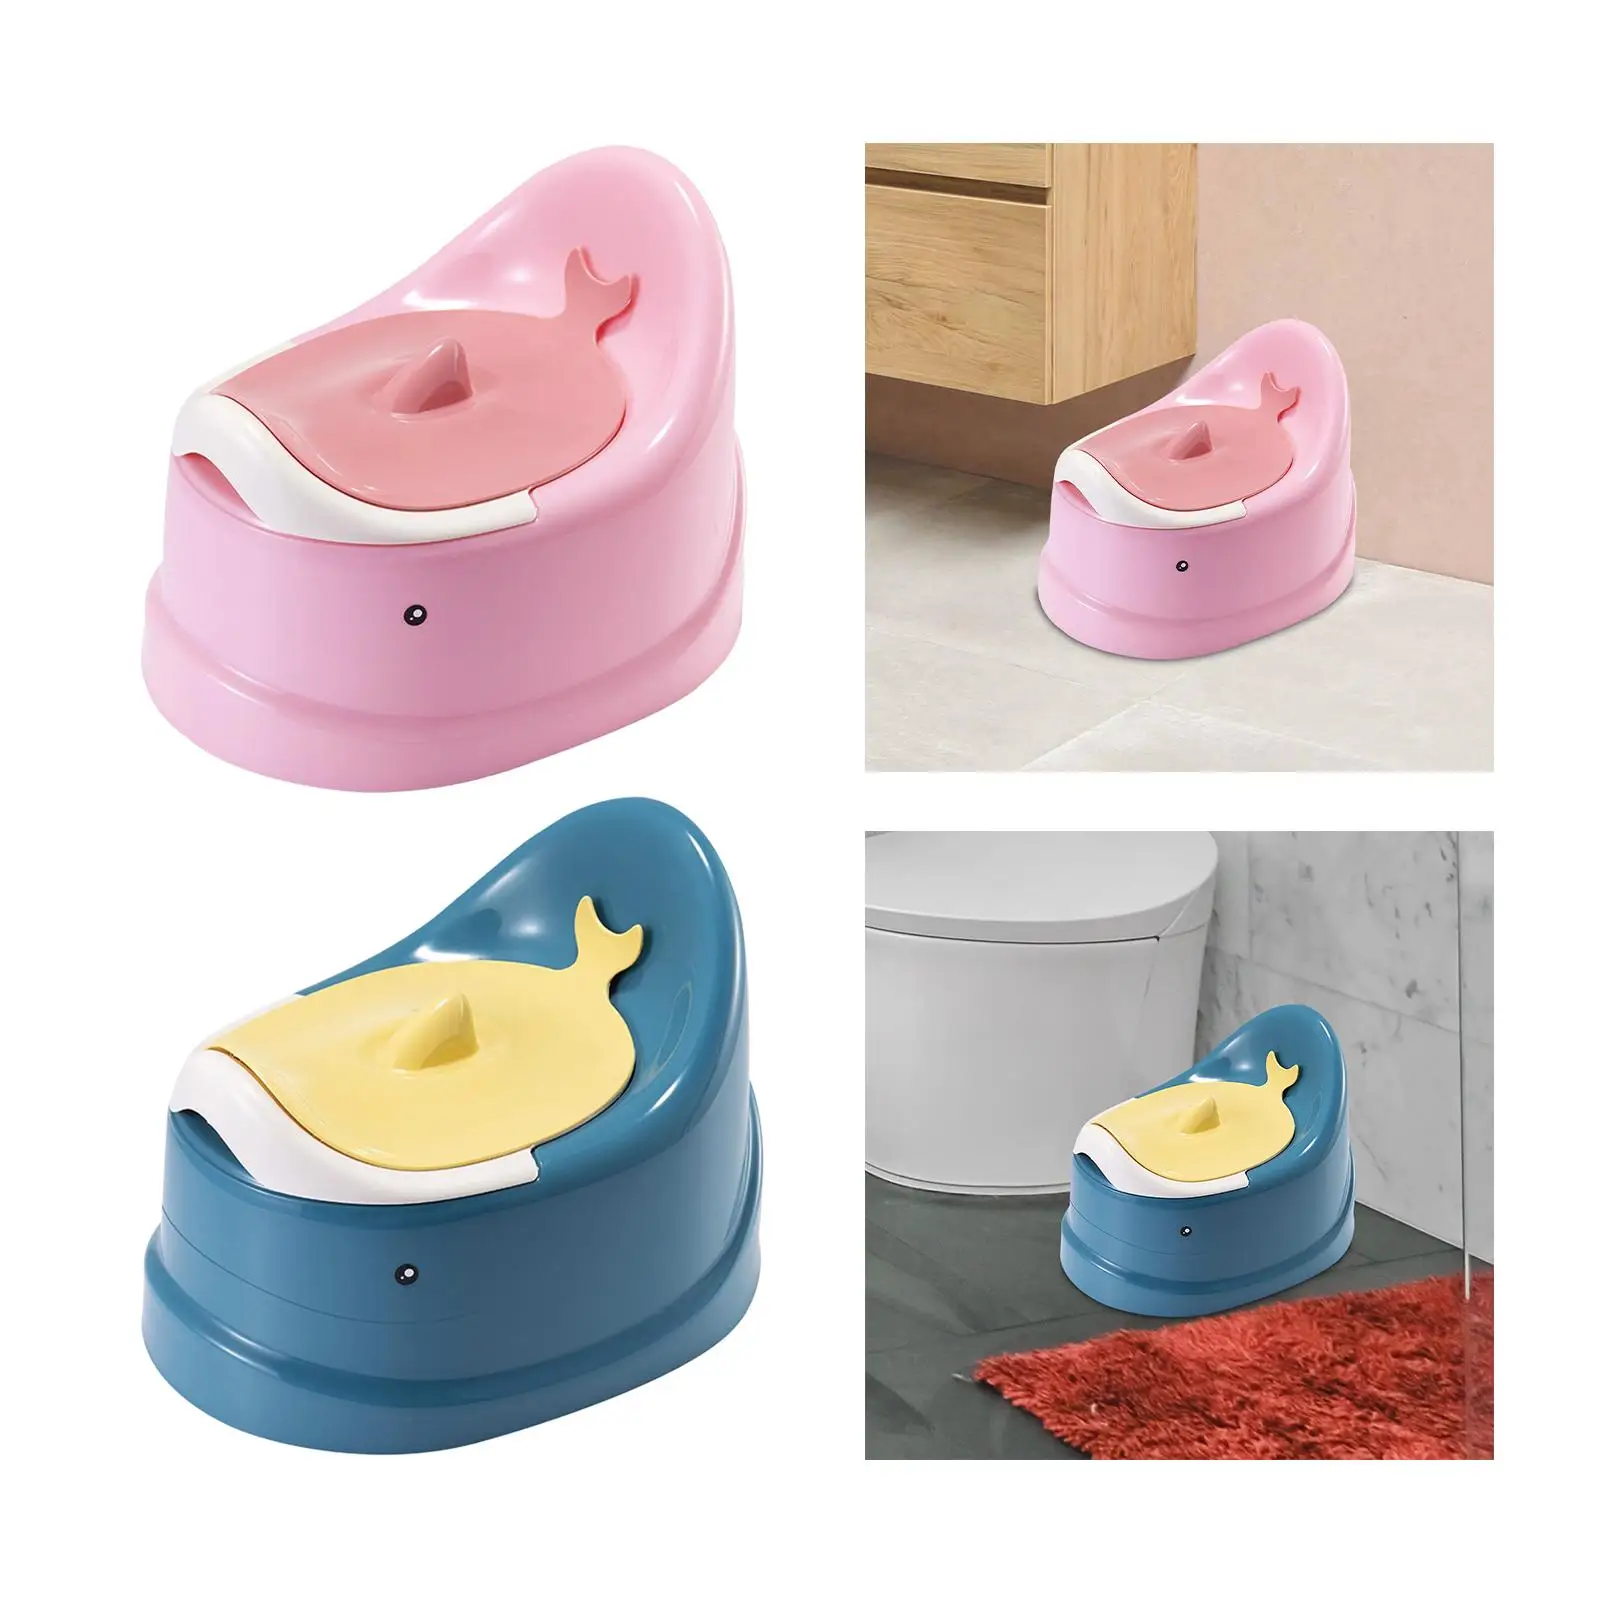 Potty Training Toilet Indoor Travel Adorable AntiSlip with Handle Comfortable with Lid Removable for Girls Boys Child Potty Seat